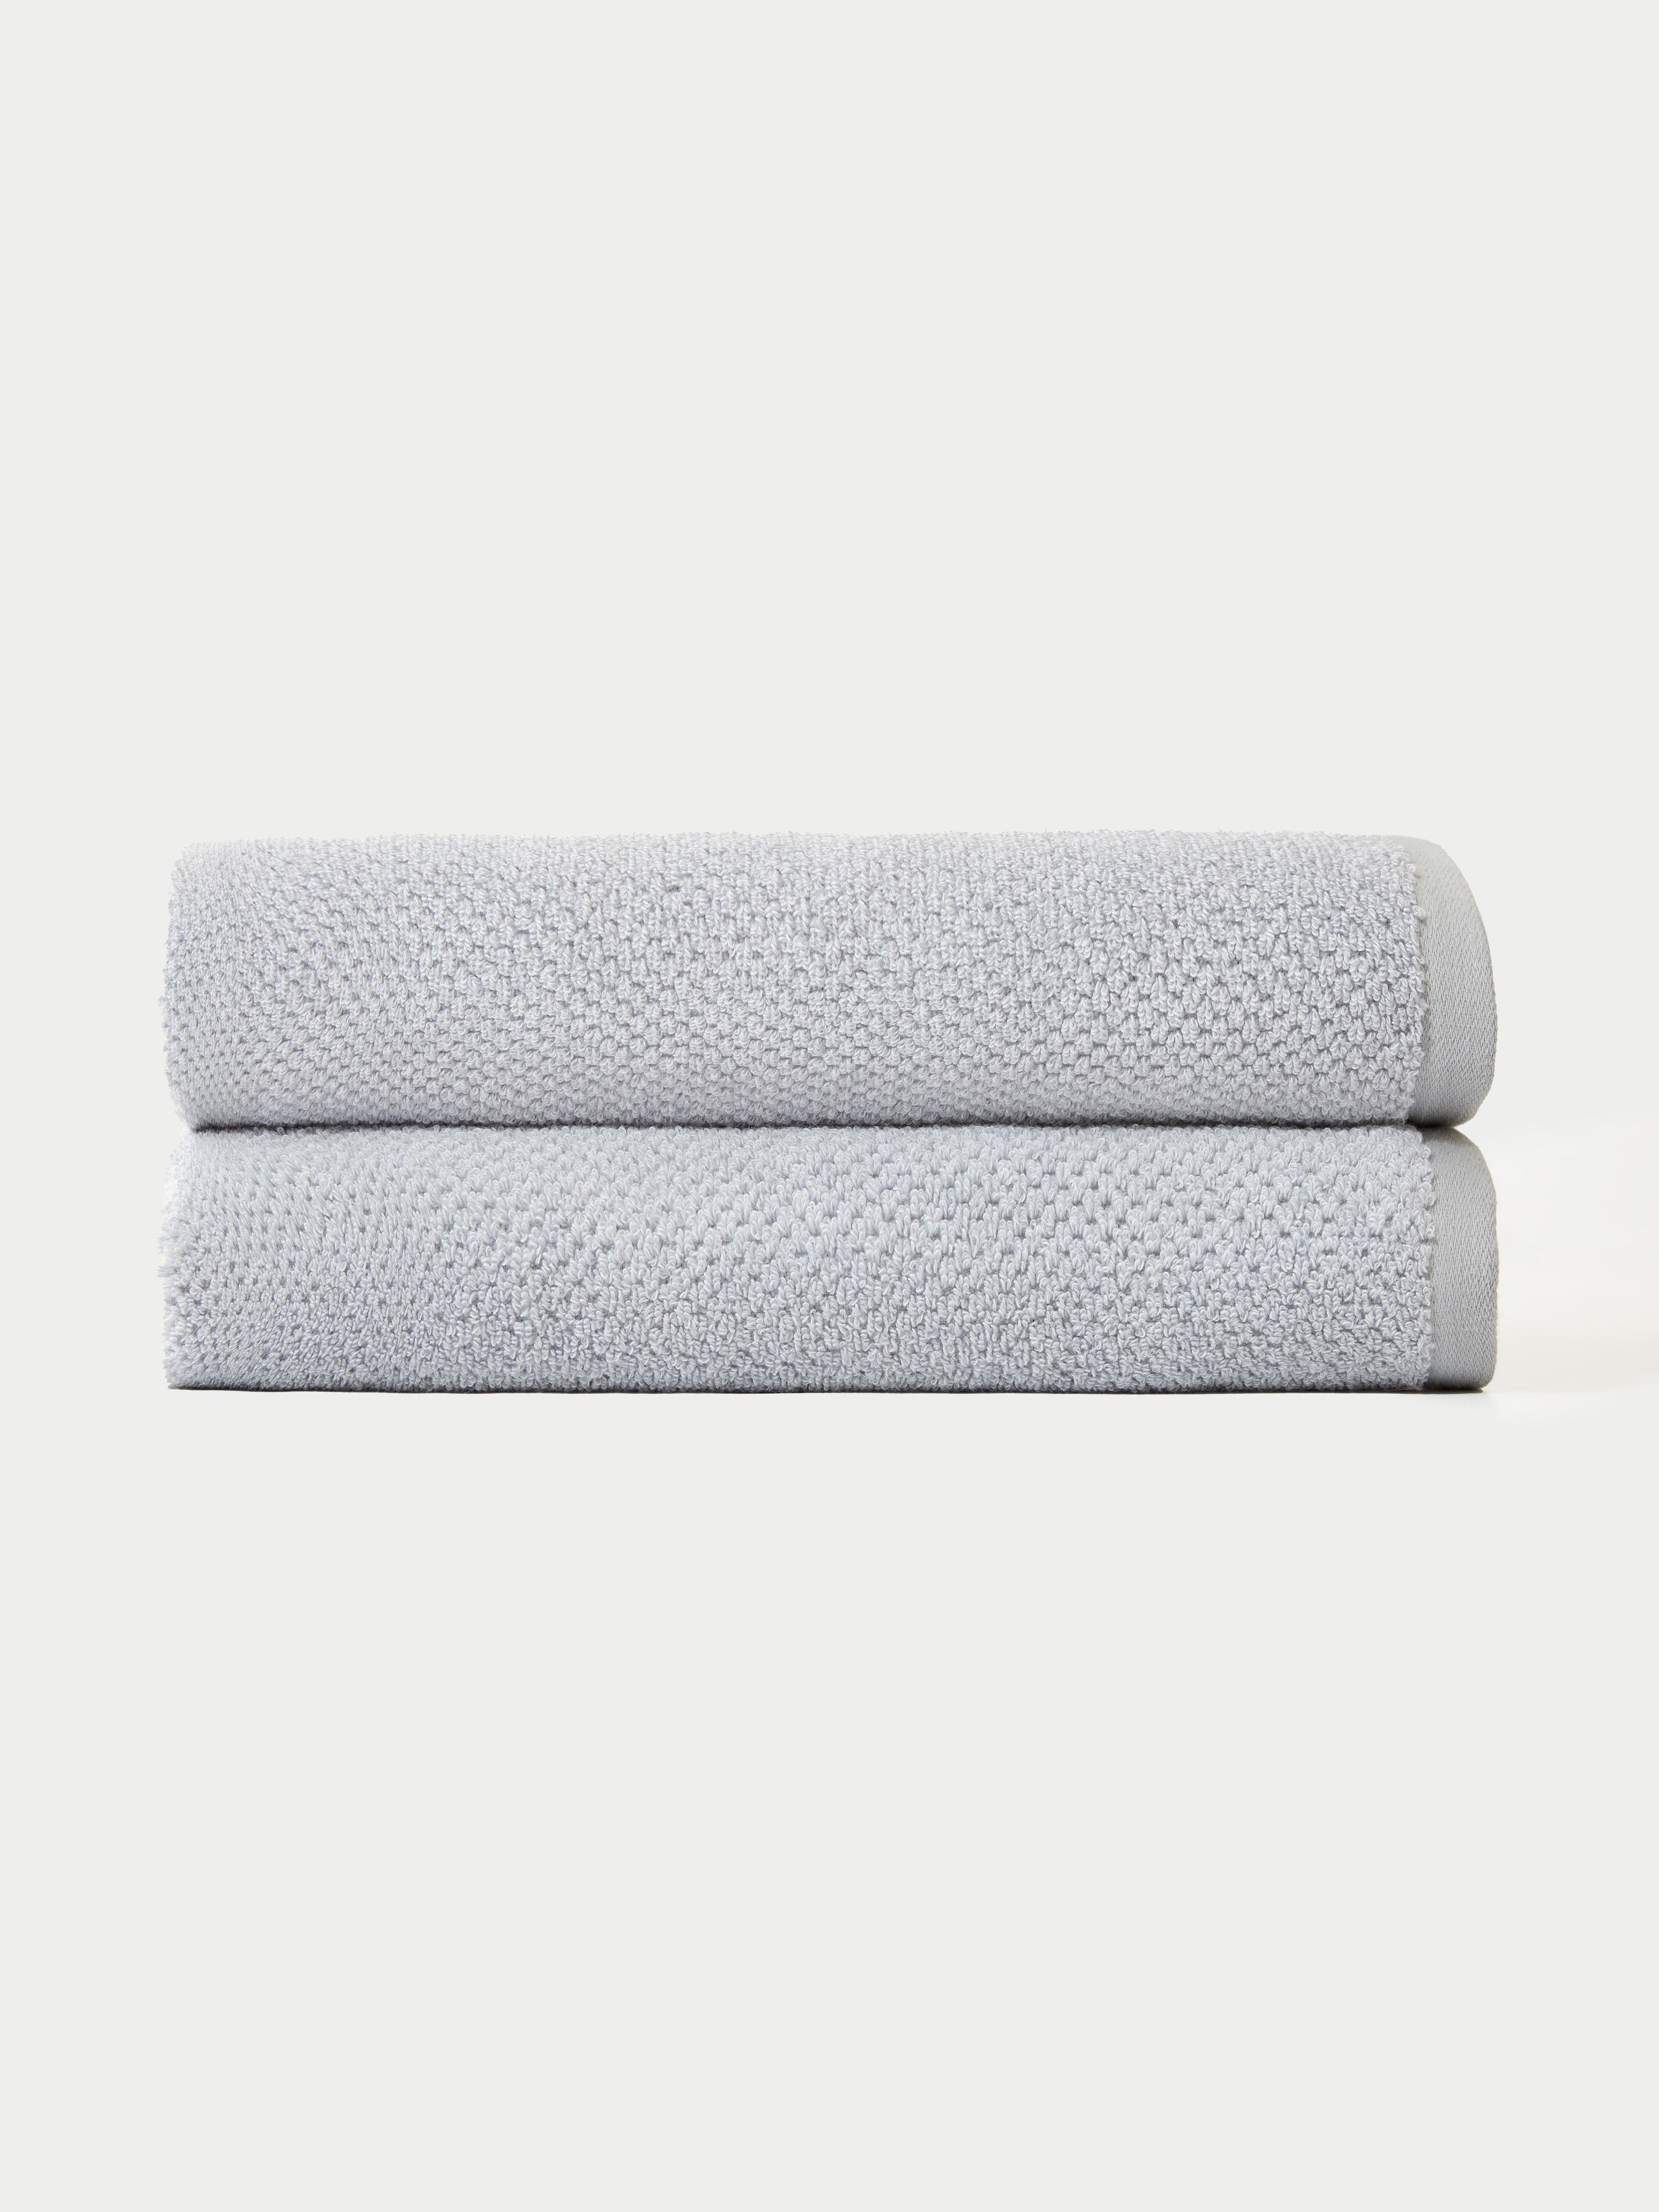 Nantucket Bath Towels in the color Heathered Harbor Mist. Photo of Nantucket Bath Towels taken with the bath towels on a white background. |Color: Heathered Harbor Mist